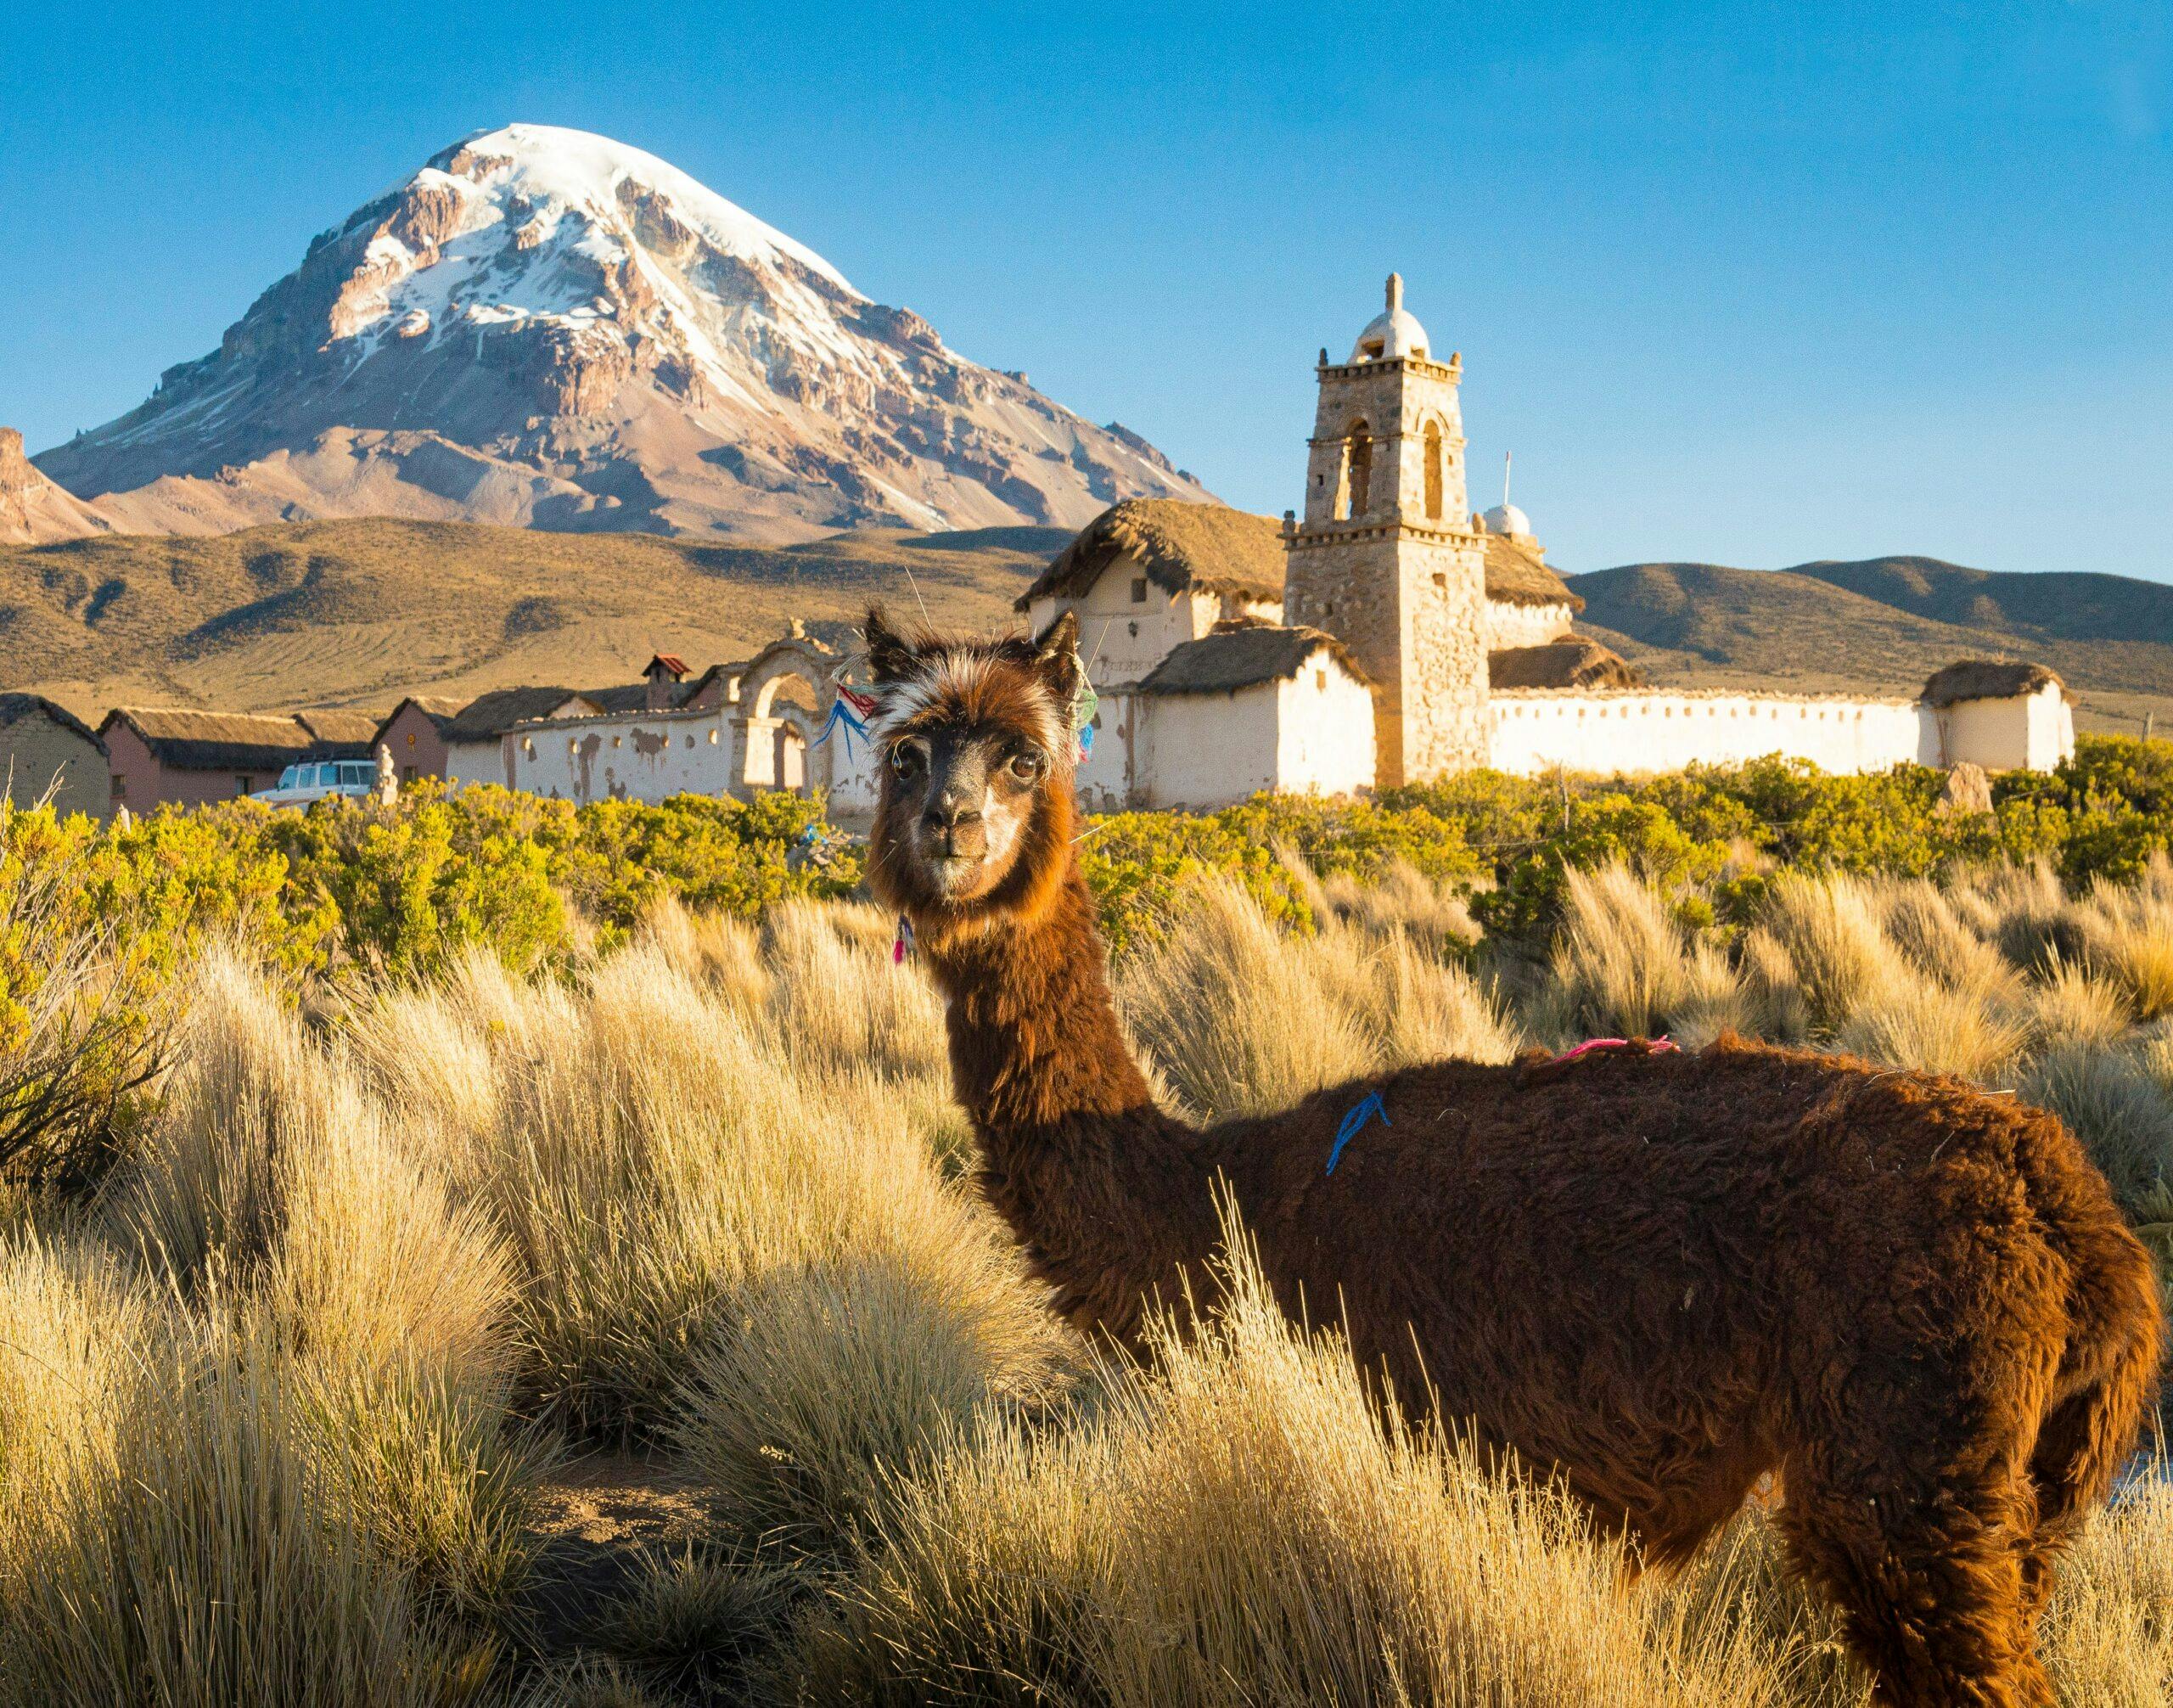 We're reimagining a fairer way to visit Bolivia